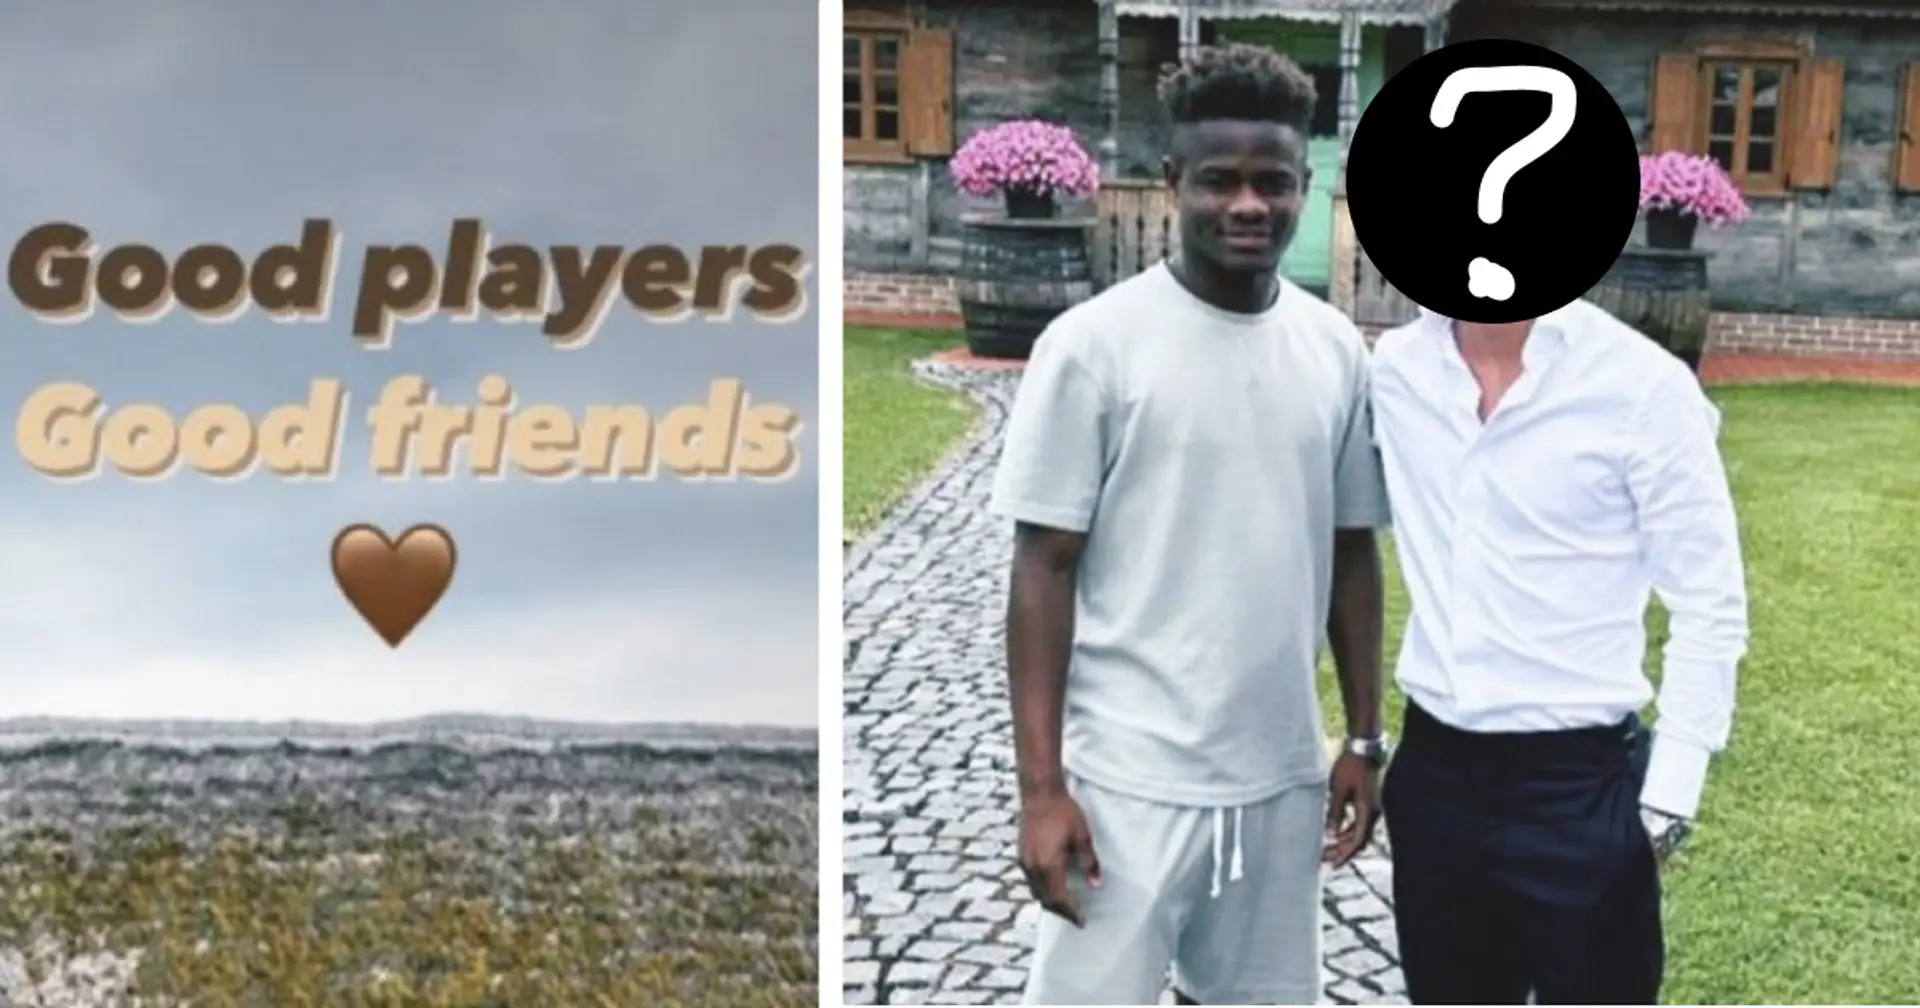 'The Monster' Mikayil Faye meets ex-La Masia prospect reportedly wanted by Barca